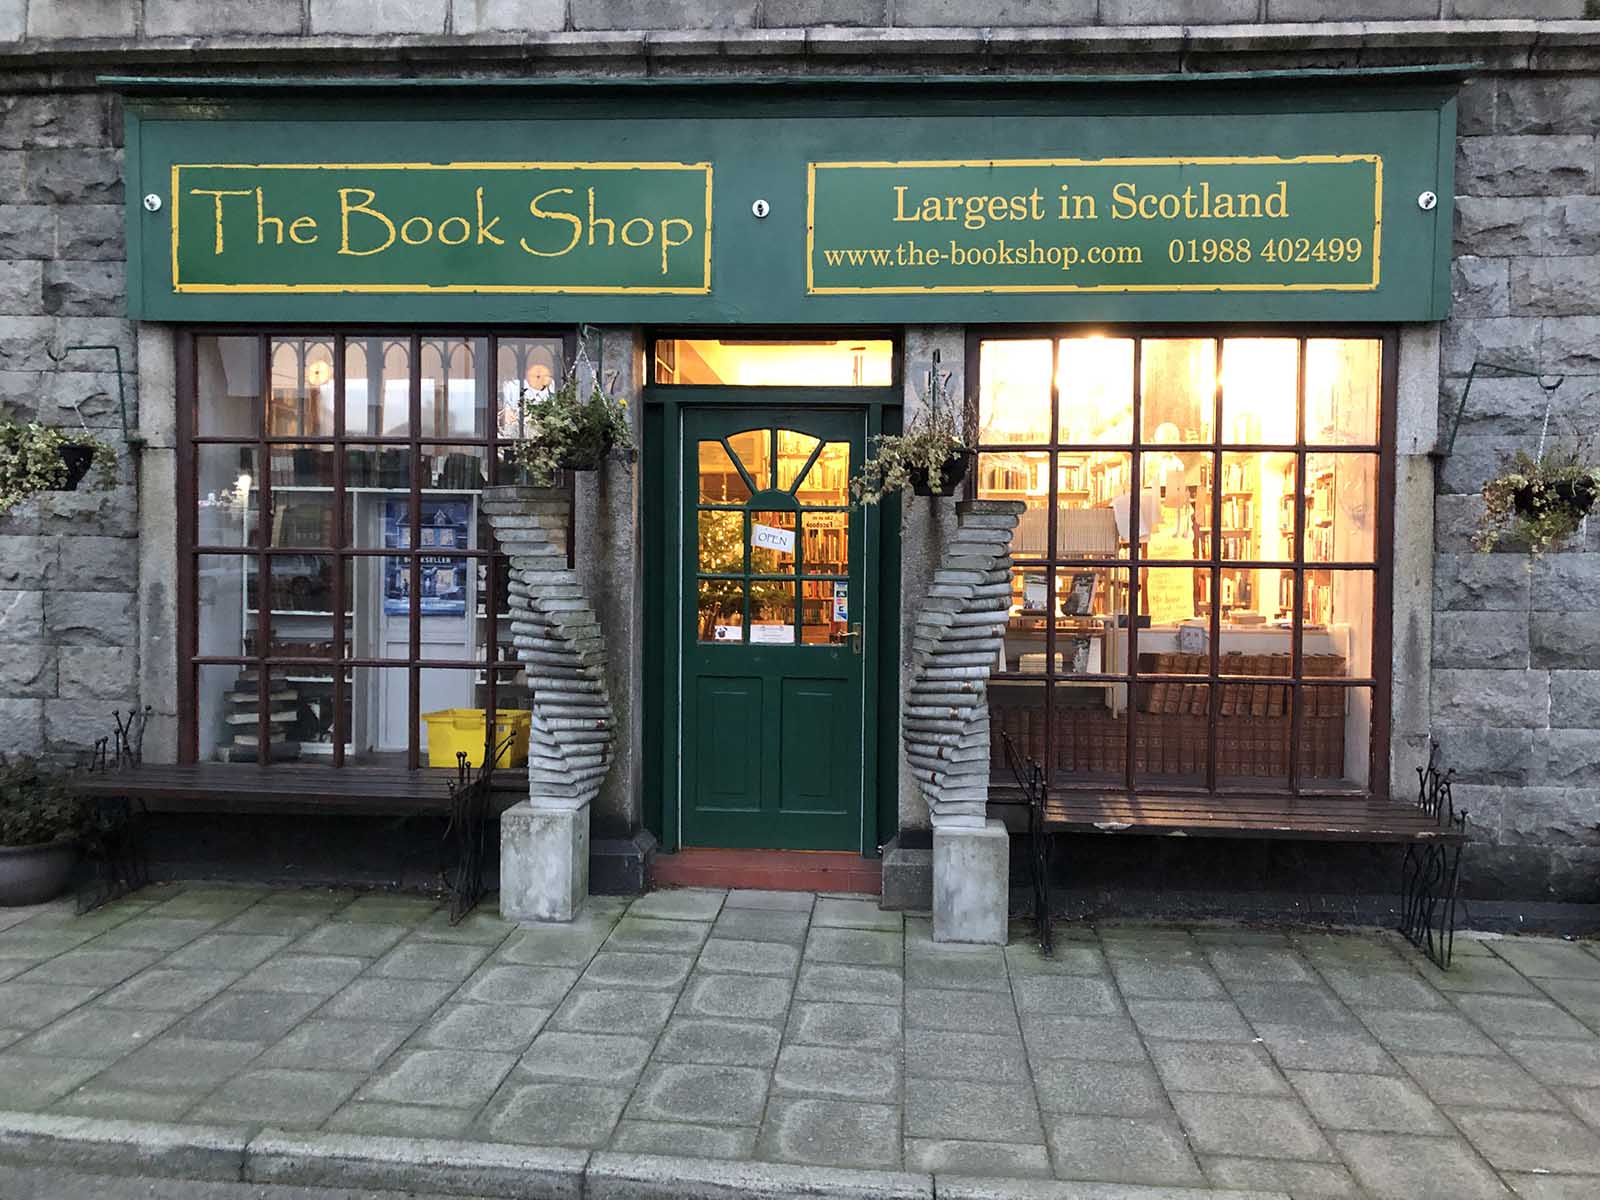 The Book Shop, Scotland | book shops for the bucket list